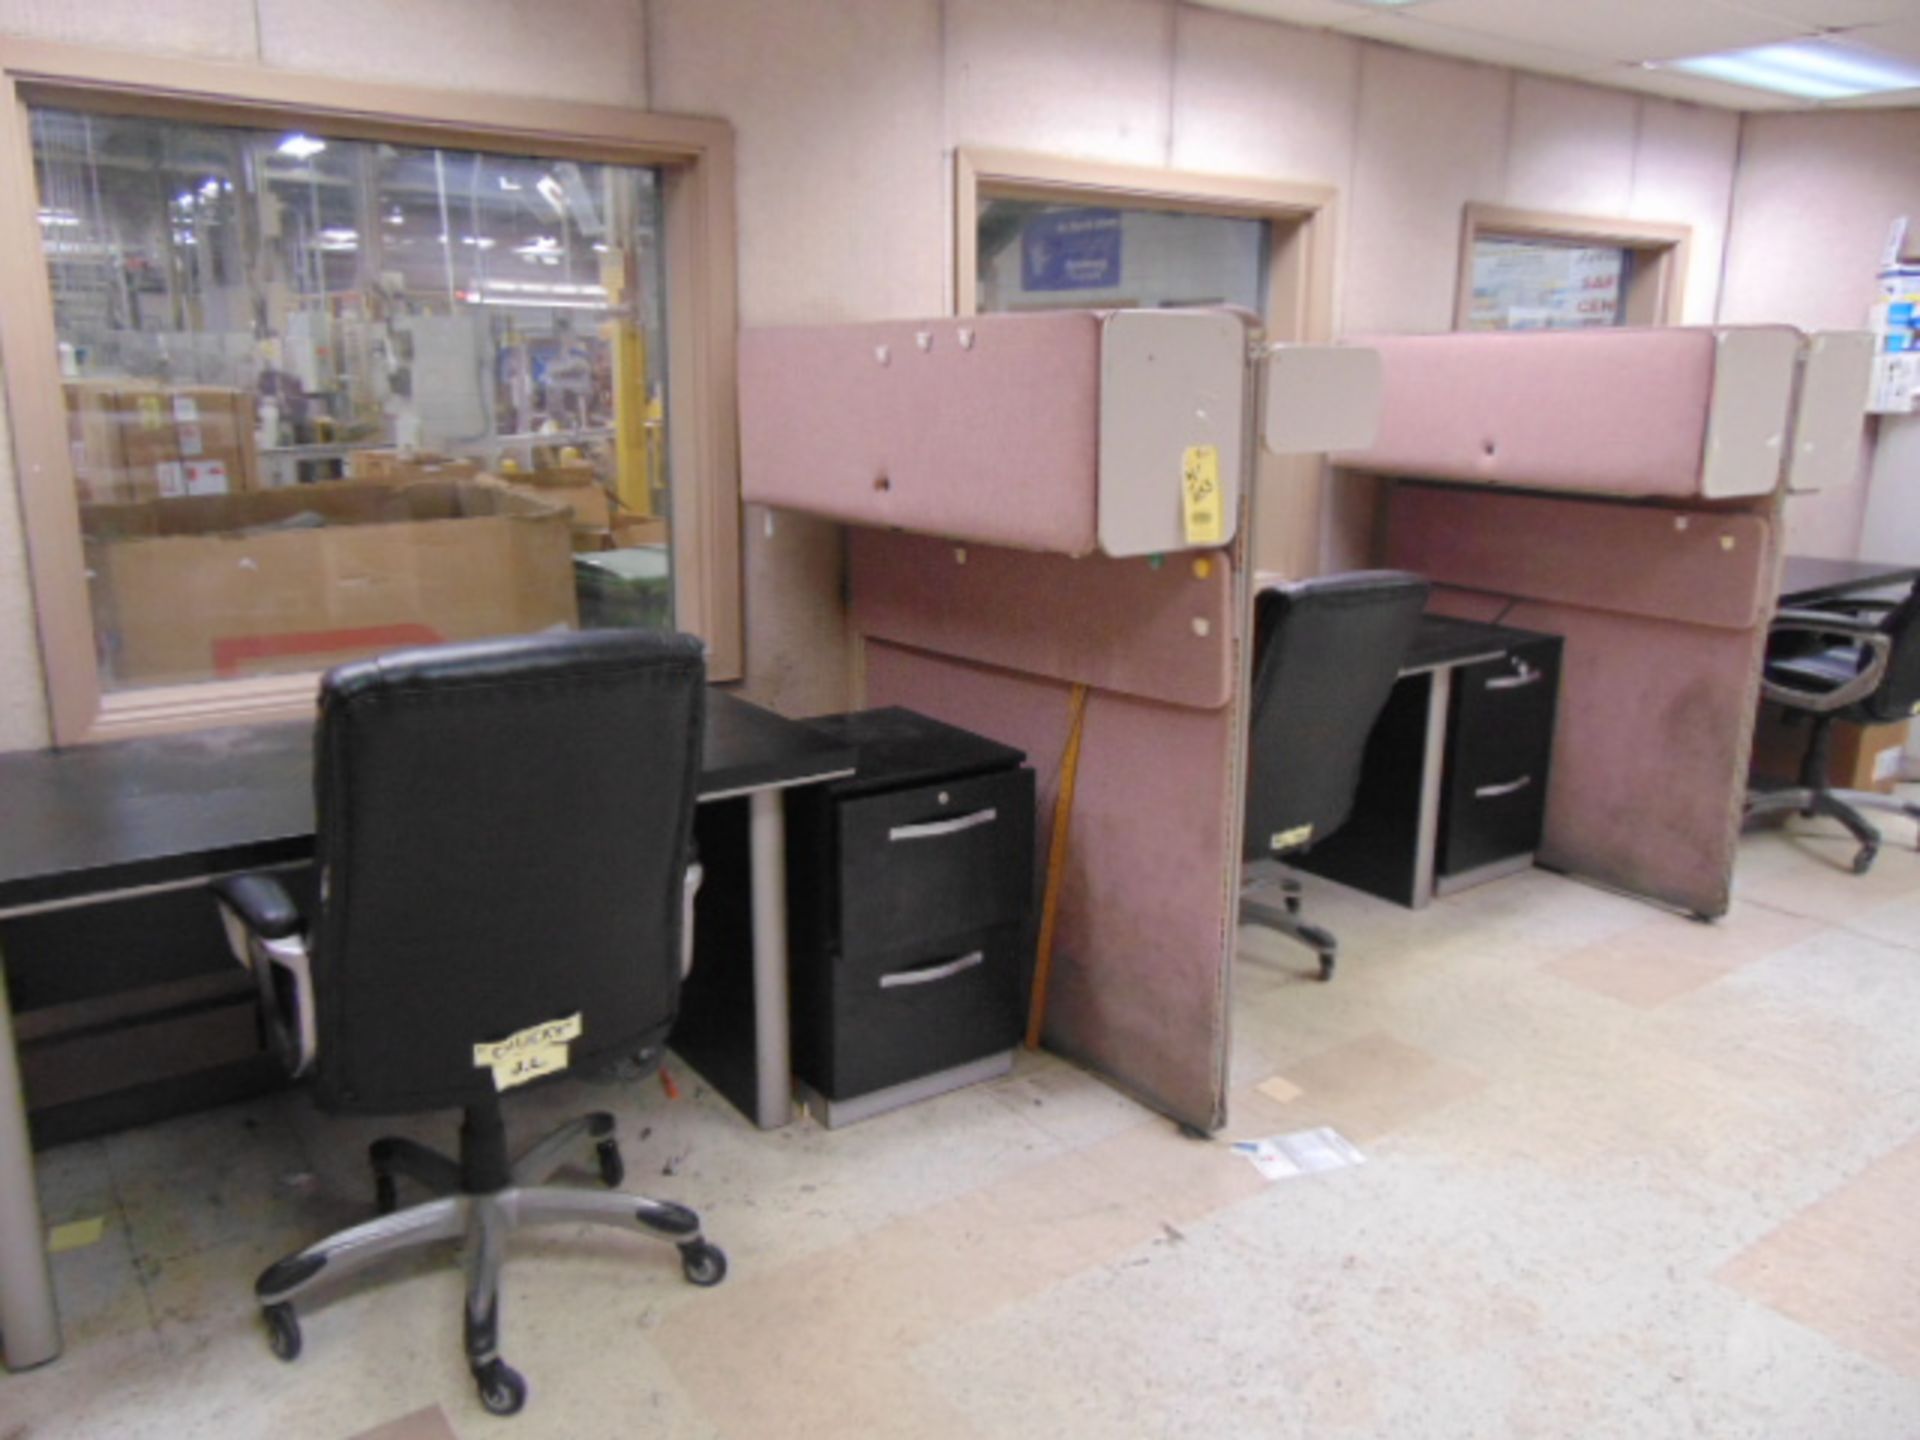 LOT OF OFFICE FURNITURE: (6) desks, (1) table, (2) file cabinets, (4) partitions, (5) chairs (Main